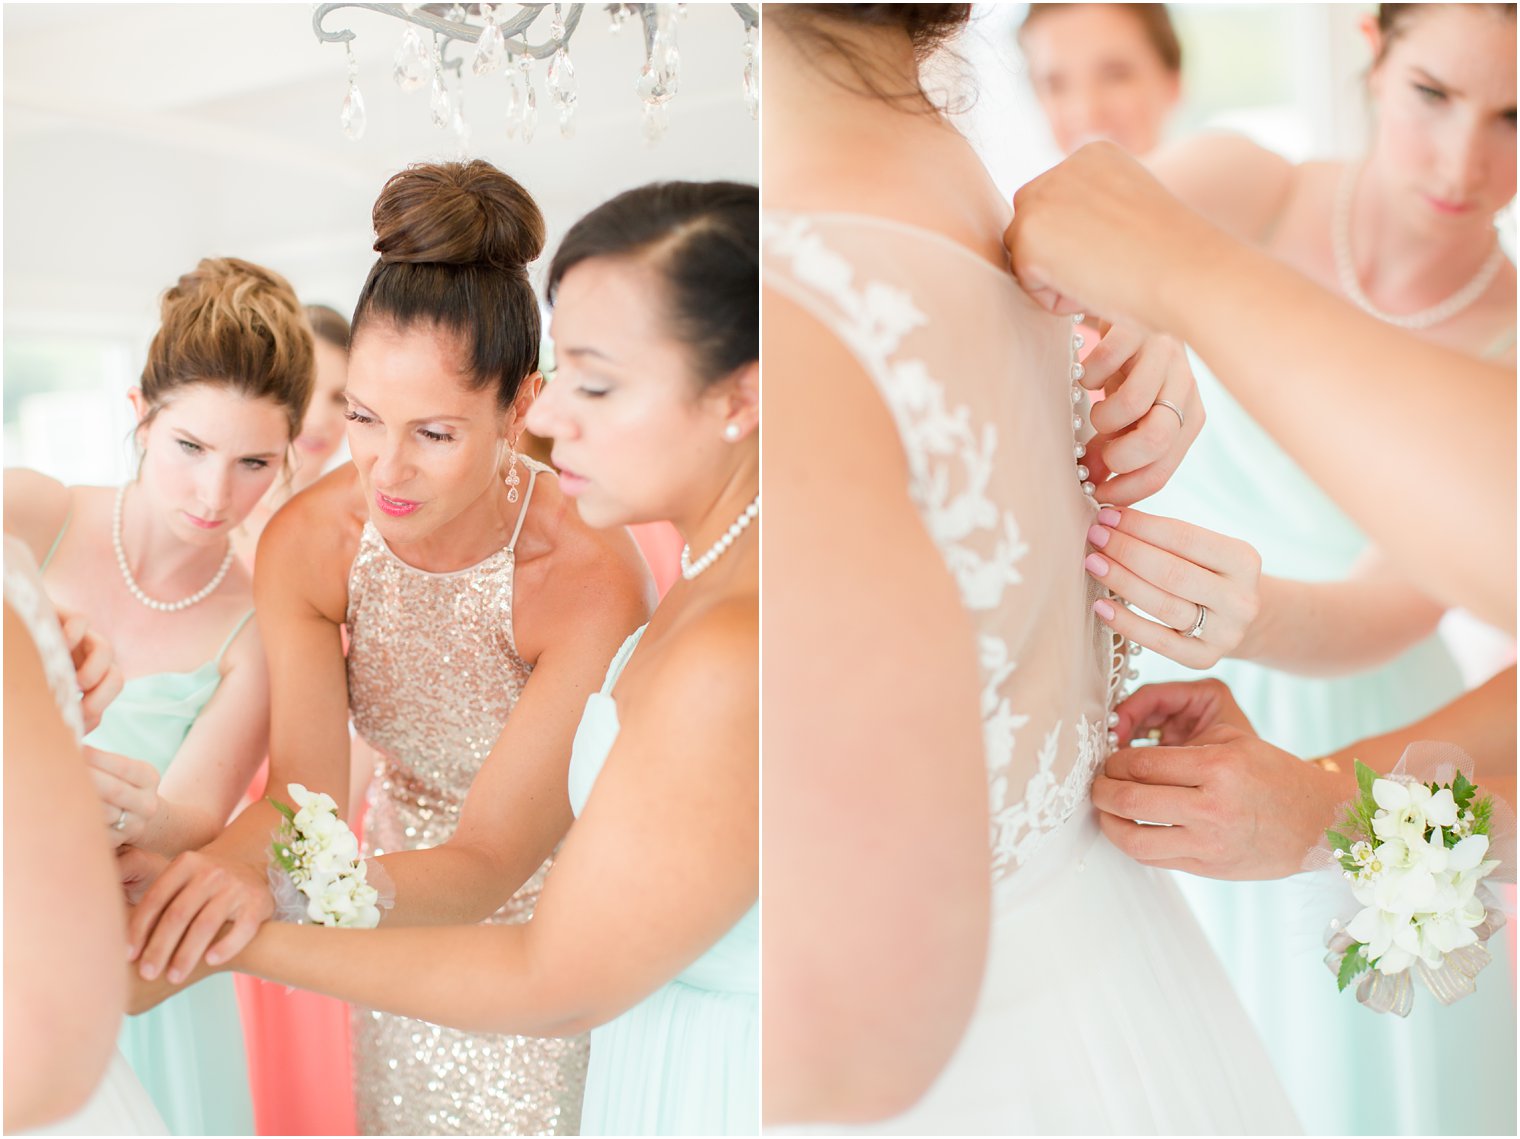 bridesmaids help bride lace up Watters wedding gown photographed by Idalia Photography